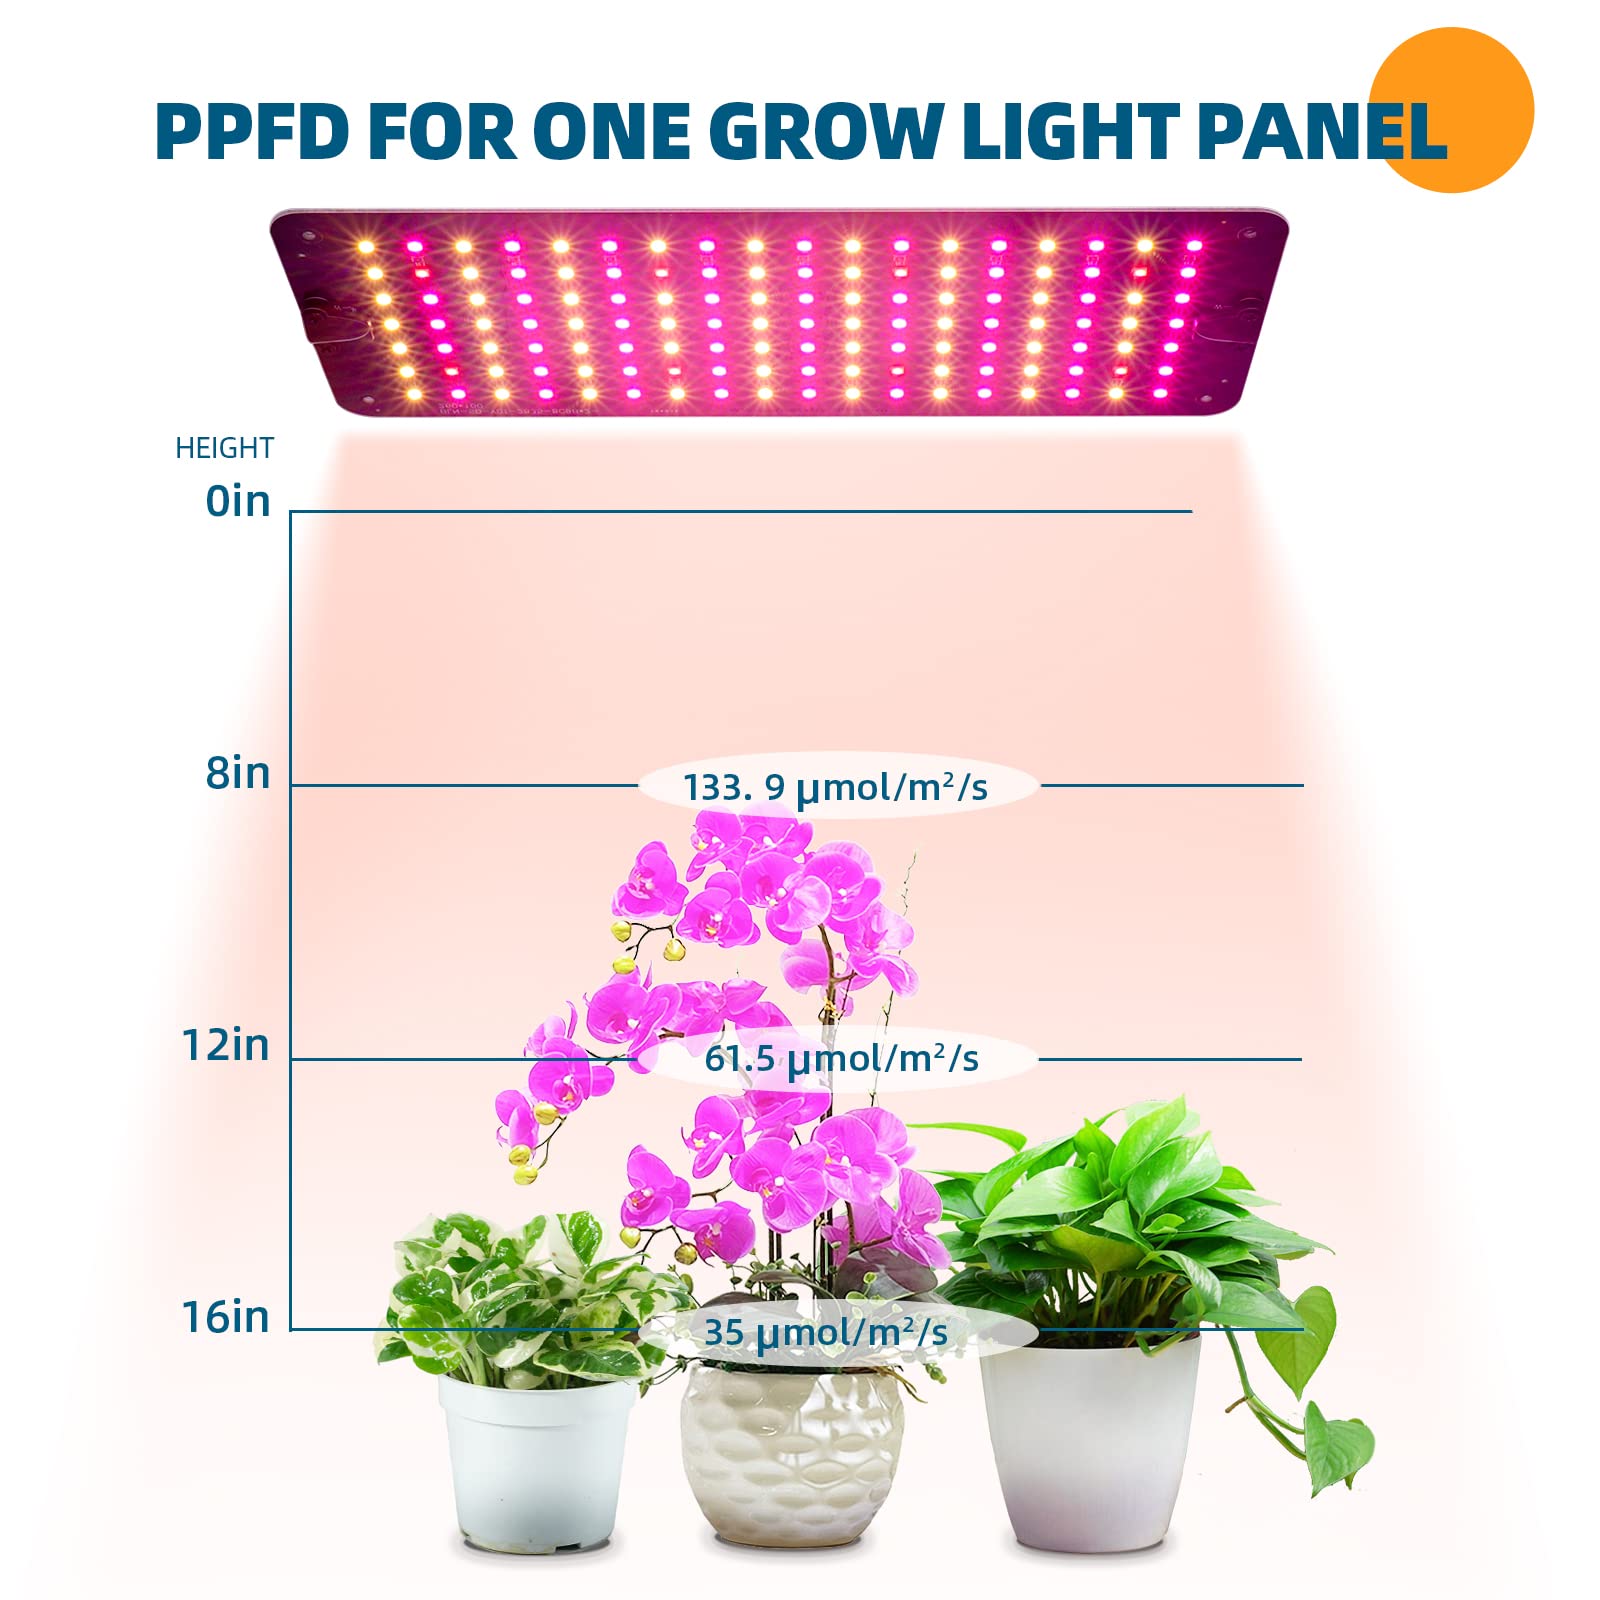 1FT Ultra - Thin LED Grow Light,10W,with 3 Spectrum Modes and Timer,4 Packs,DC10(H) - Barrina led